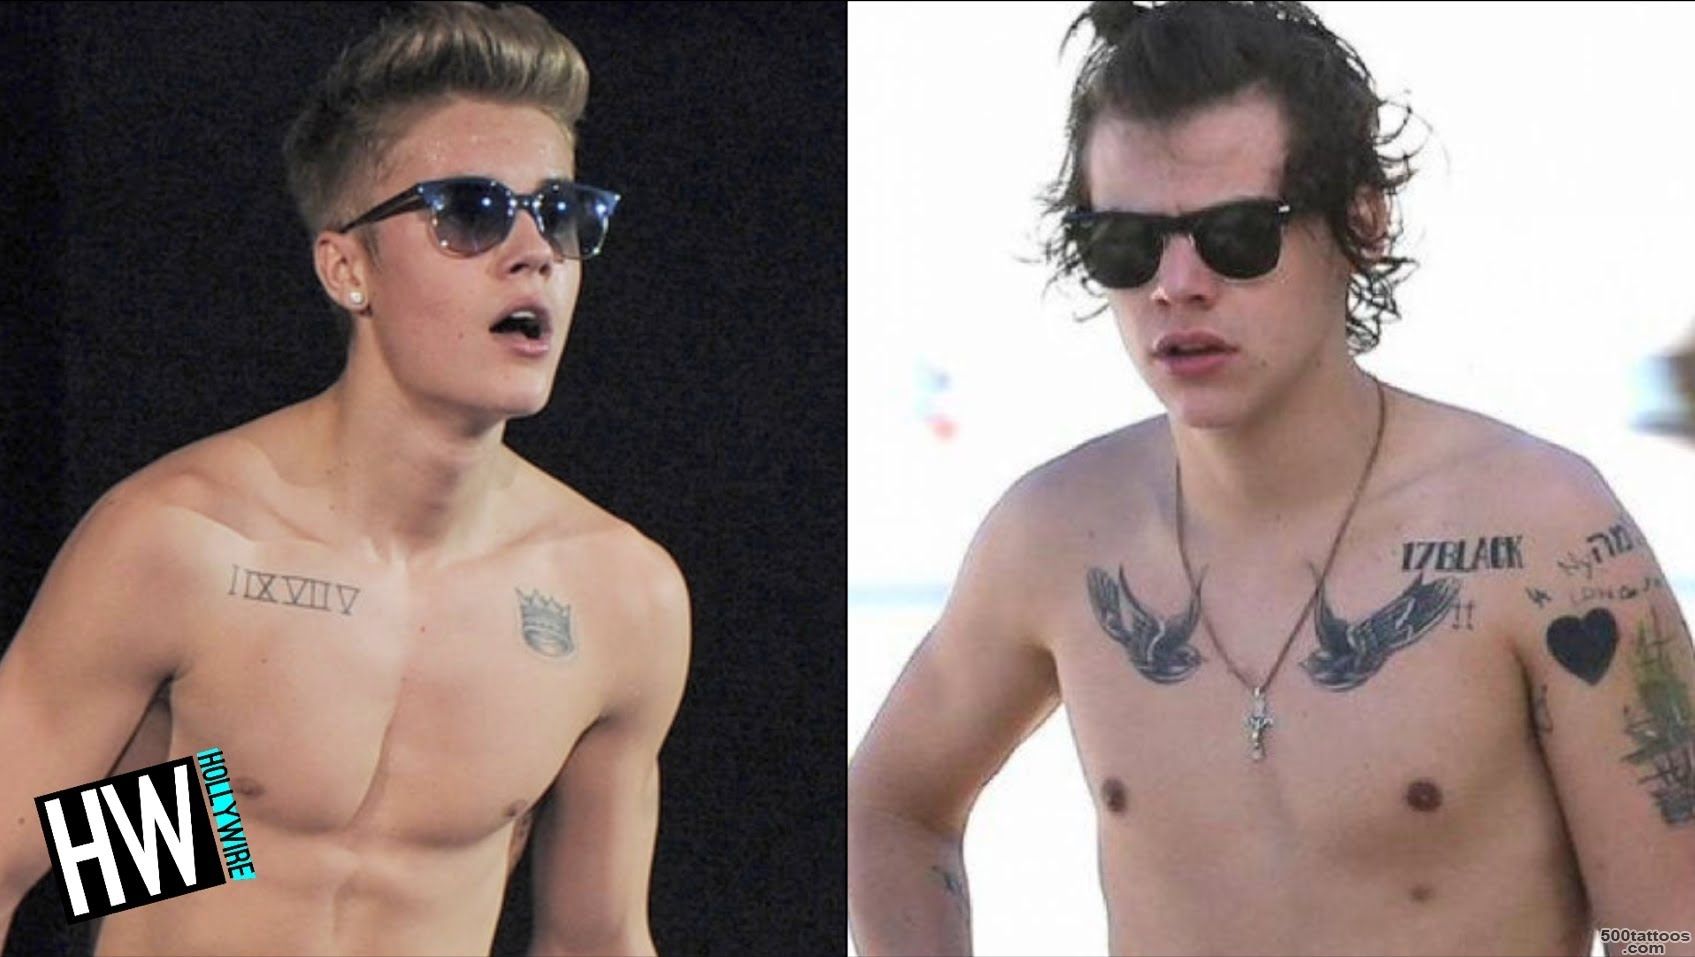 WTF! Harry Styles amp Justin Bieber   Tattoo Addicts!   YouTube_16